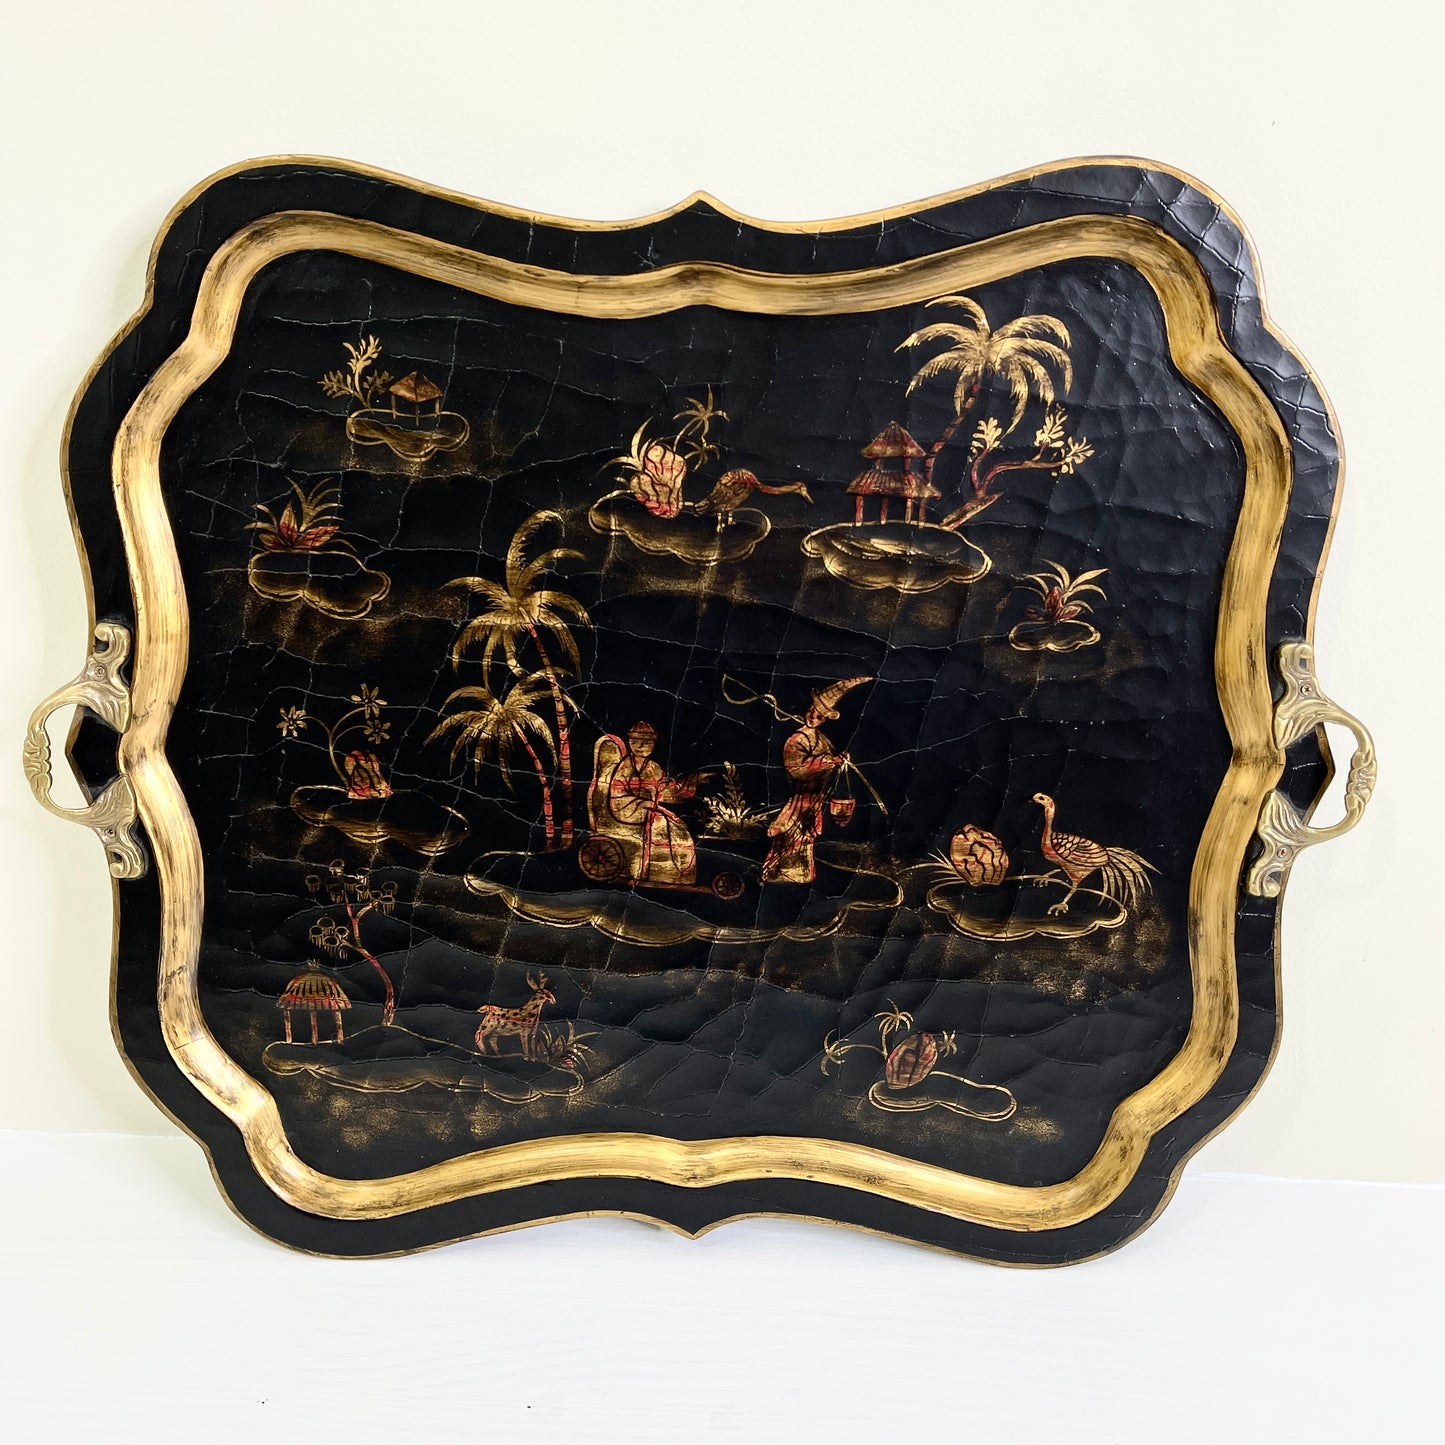 Chinoiserie Crackle Finish Tray